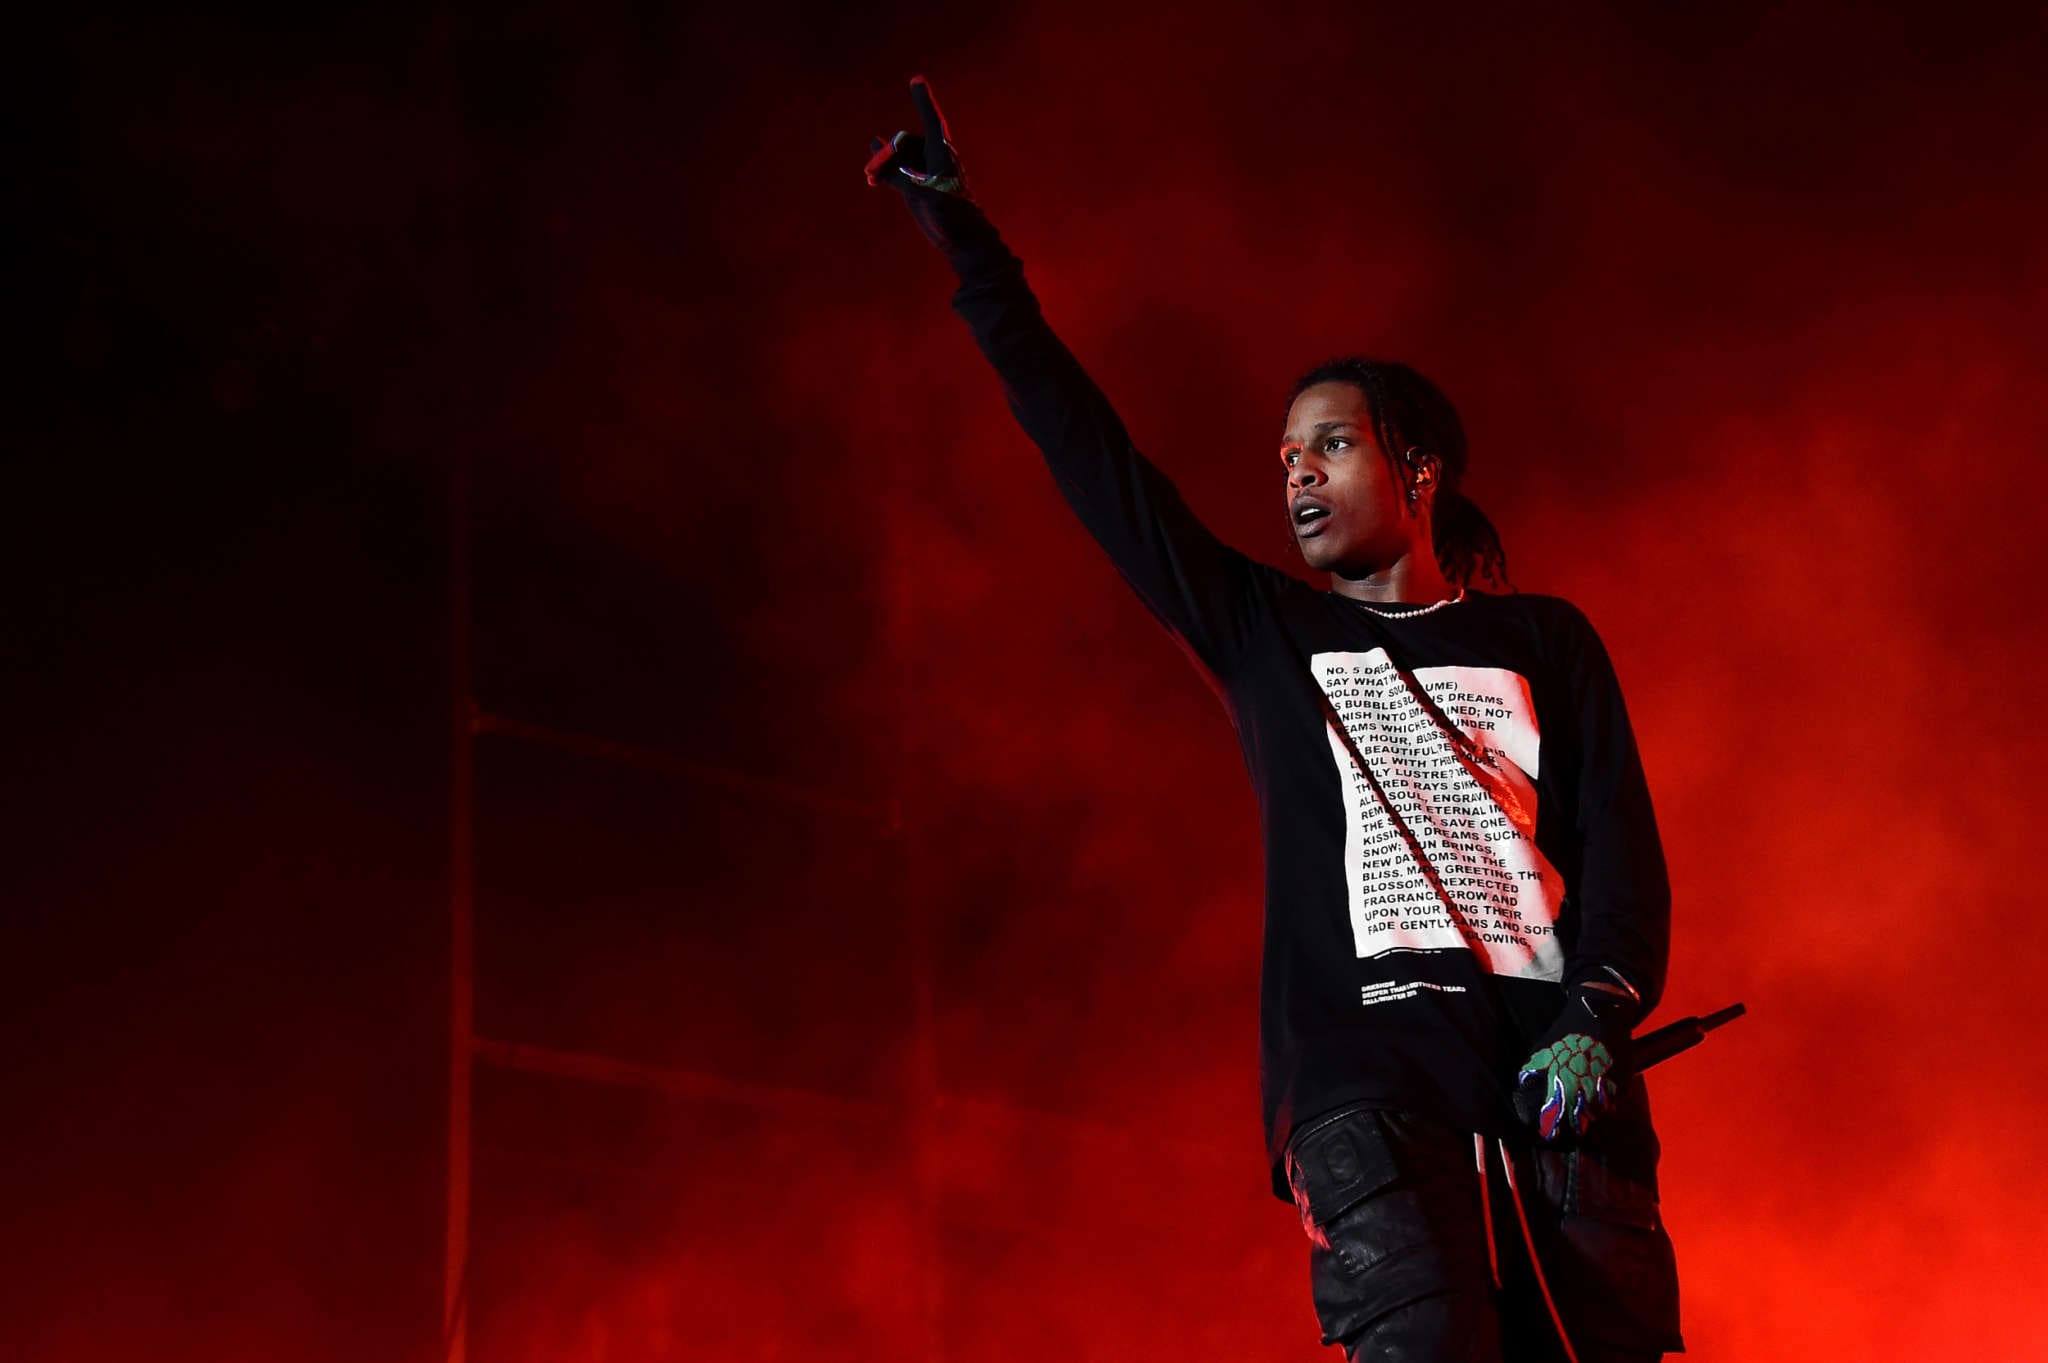 A$AP Rocky Plans To Design Uniforms For The Inmates In The Swedish Prison